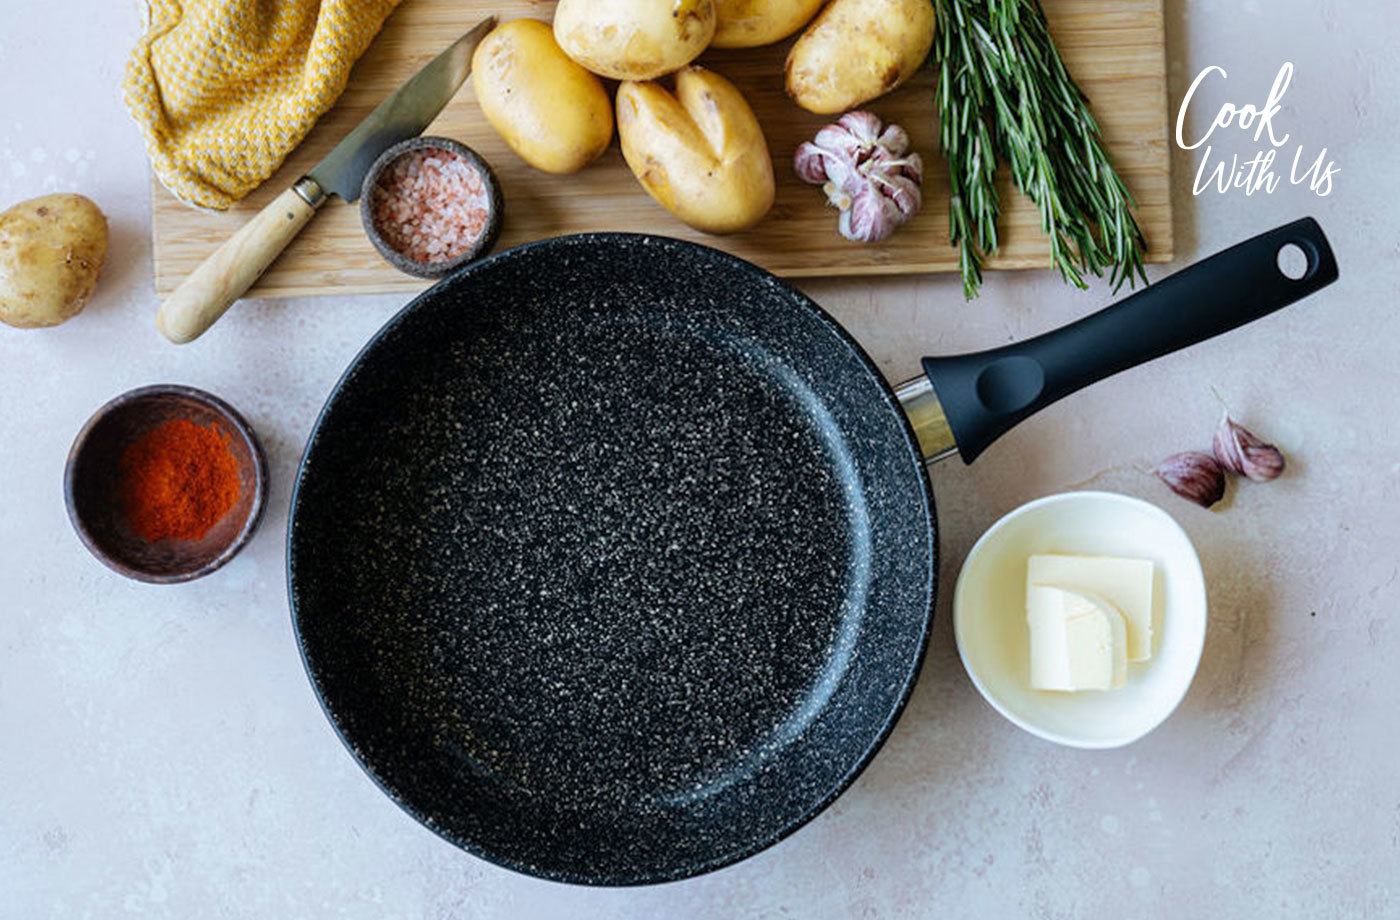 https://www.wellandgood.com/wp-content/uploads/2019/09/9-11-Cook-w-us-Cook-With-Us-seal-on-main-for-frying-pan-story.jpg